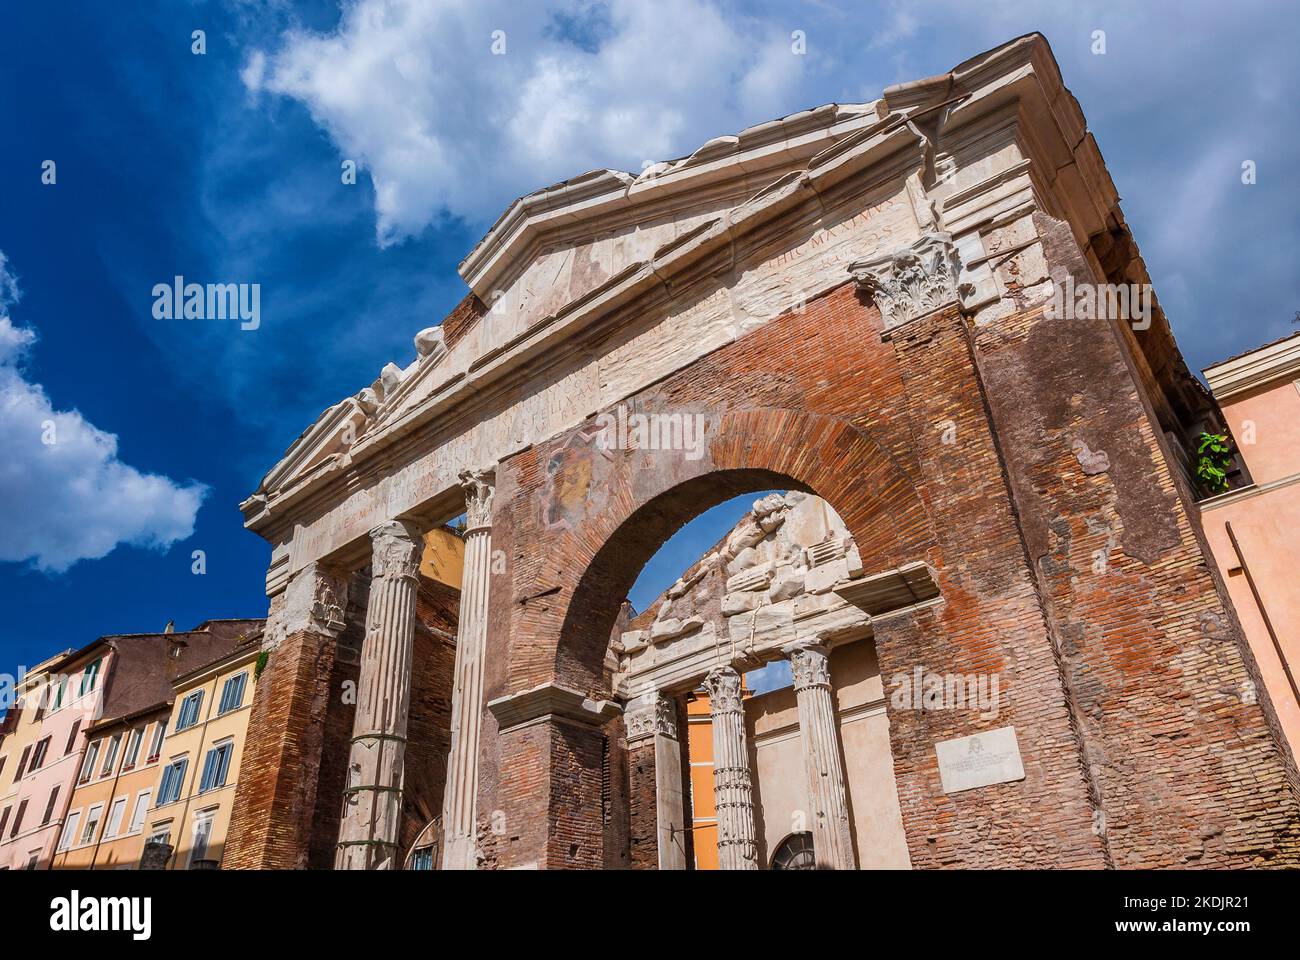 Porticus Octaviae ancient ruins at the entrance of the Jewish Ghetto in the historic center of Rome Stock Photo